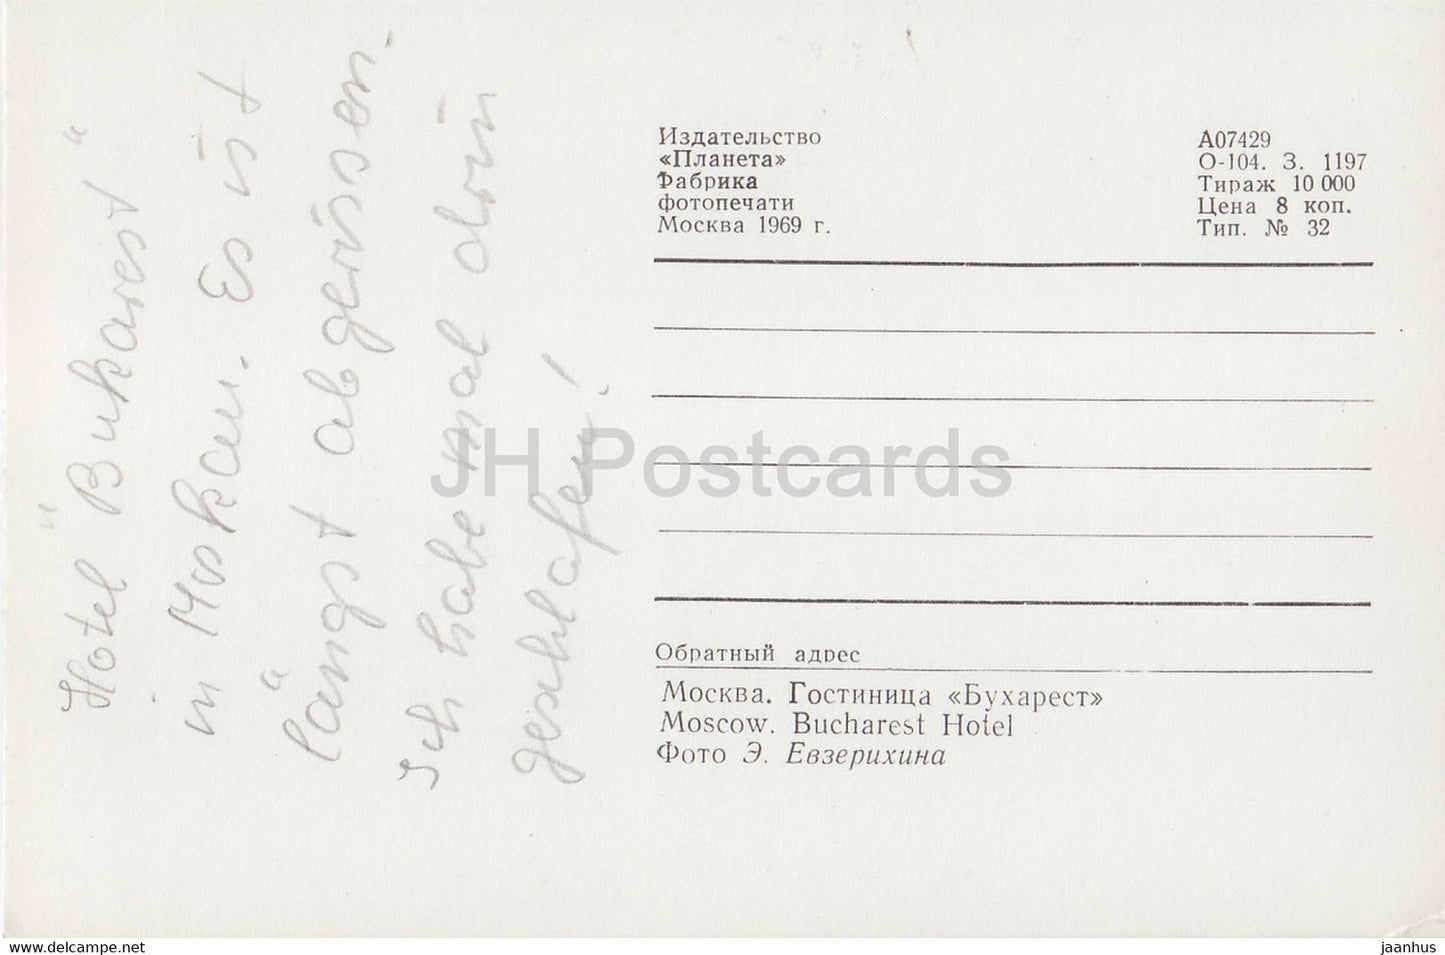 Moscow - hotel Bucharest - passenger boat - 1969 - Russia USSR - used